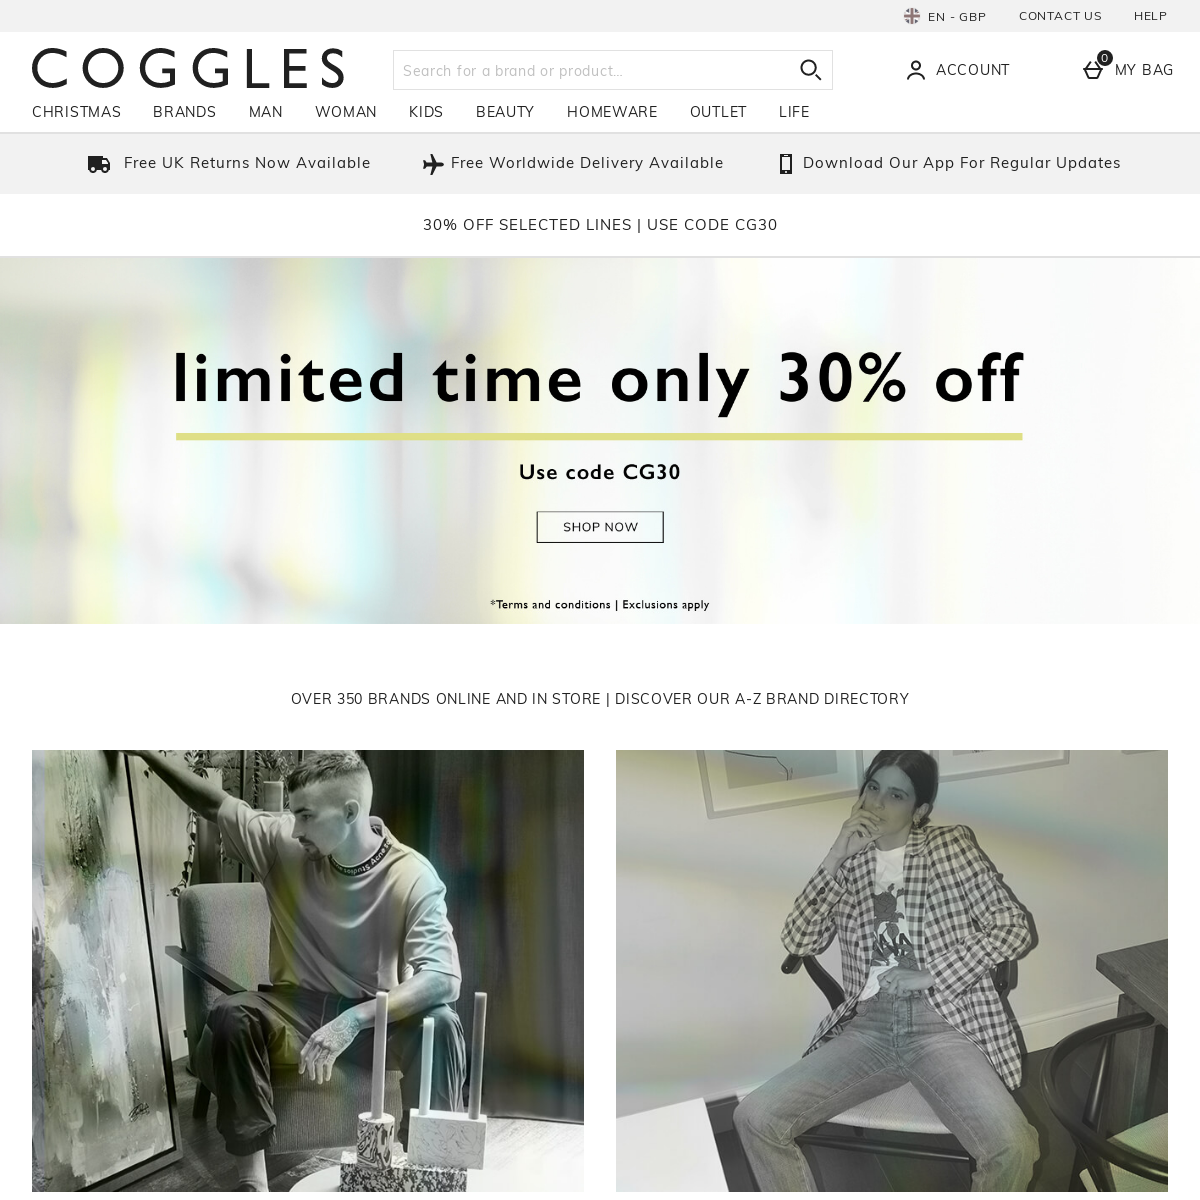 A complete backup of coggles.com